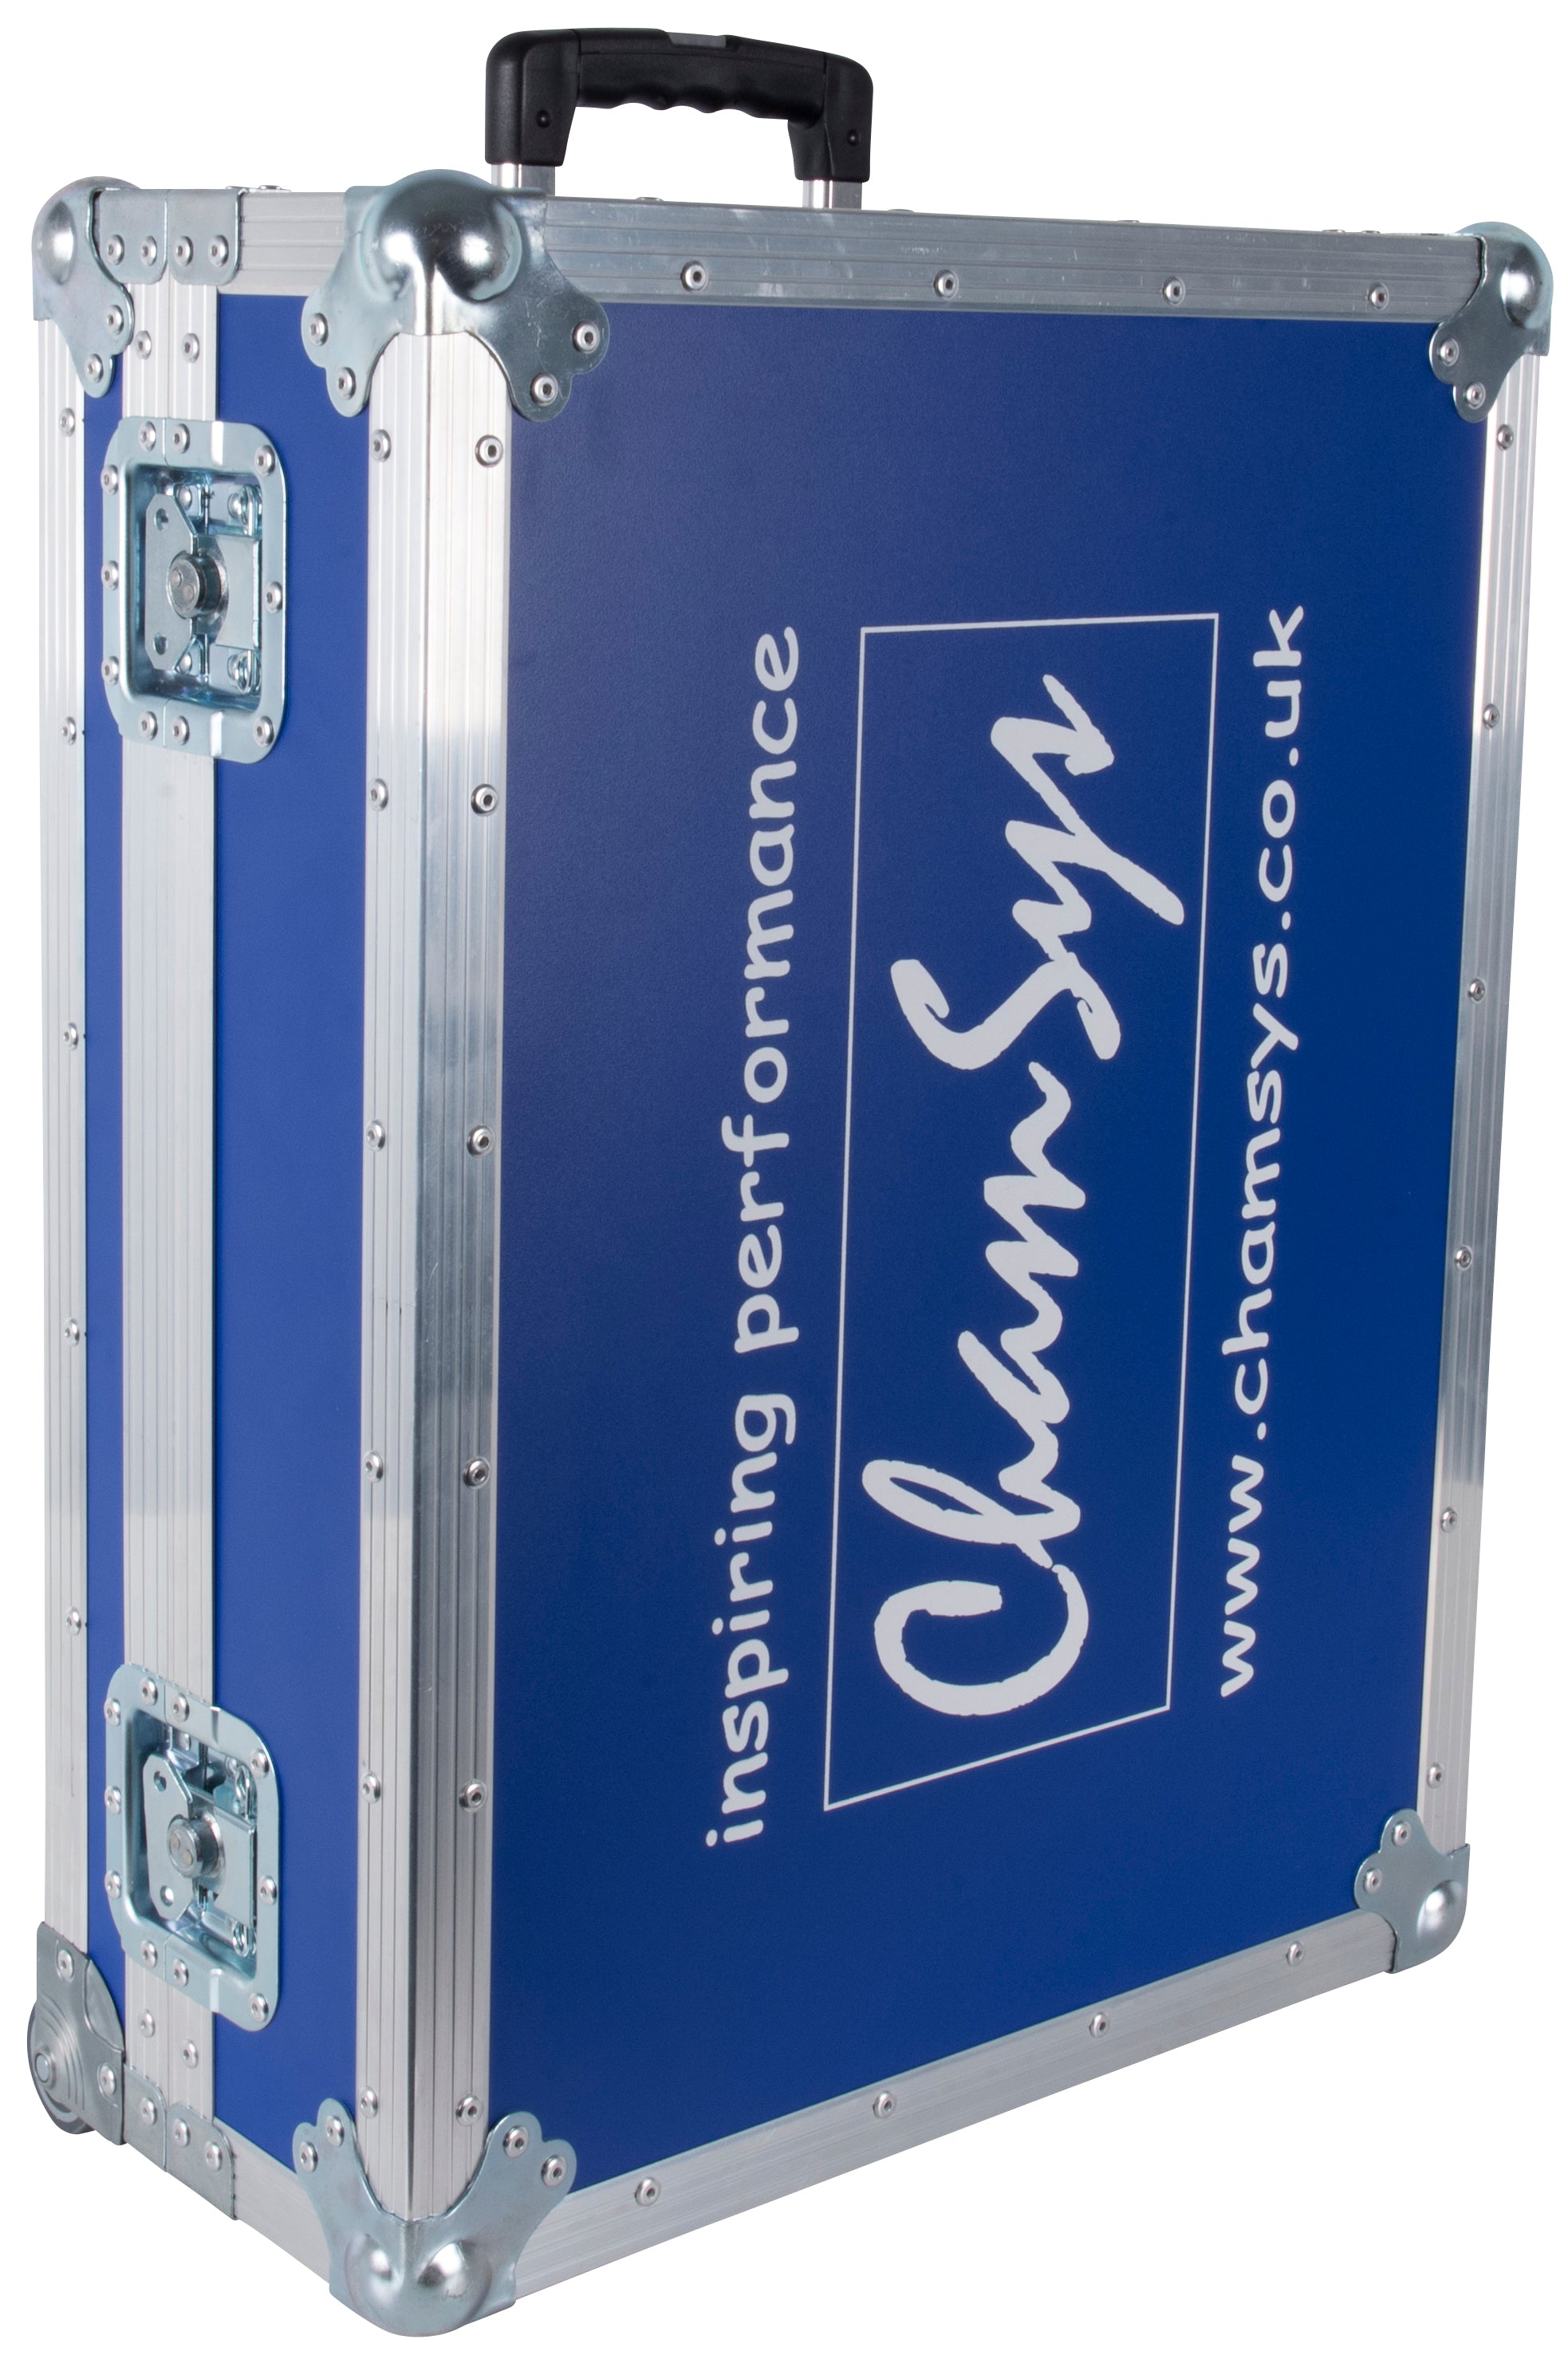 Flight Case for MagicQ MQ80 Blue with wheels.